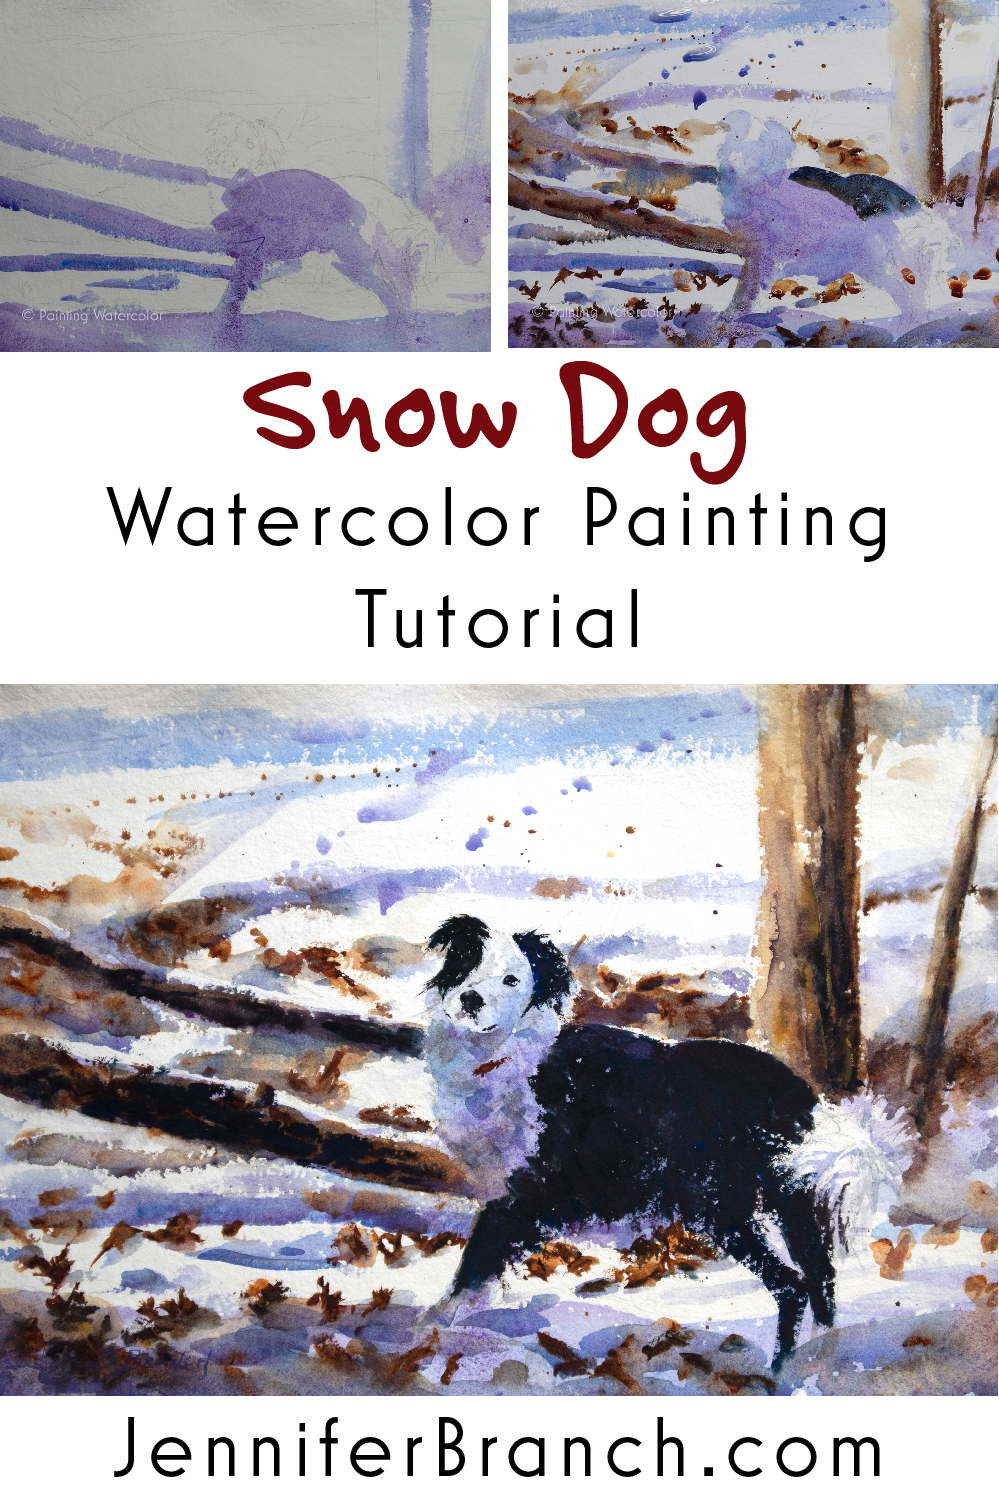 Snow Dog Painting Tutorial watercolor painting tutorial by Jennifer Branch